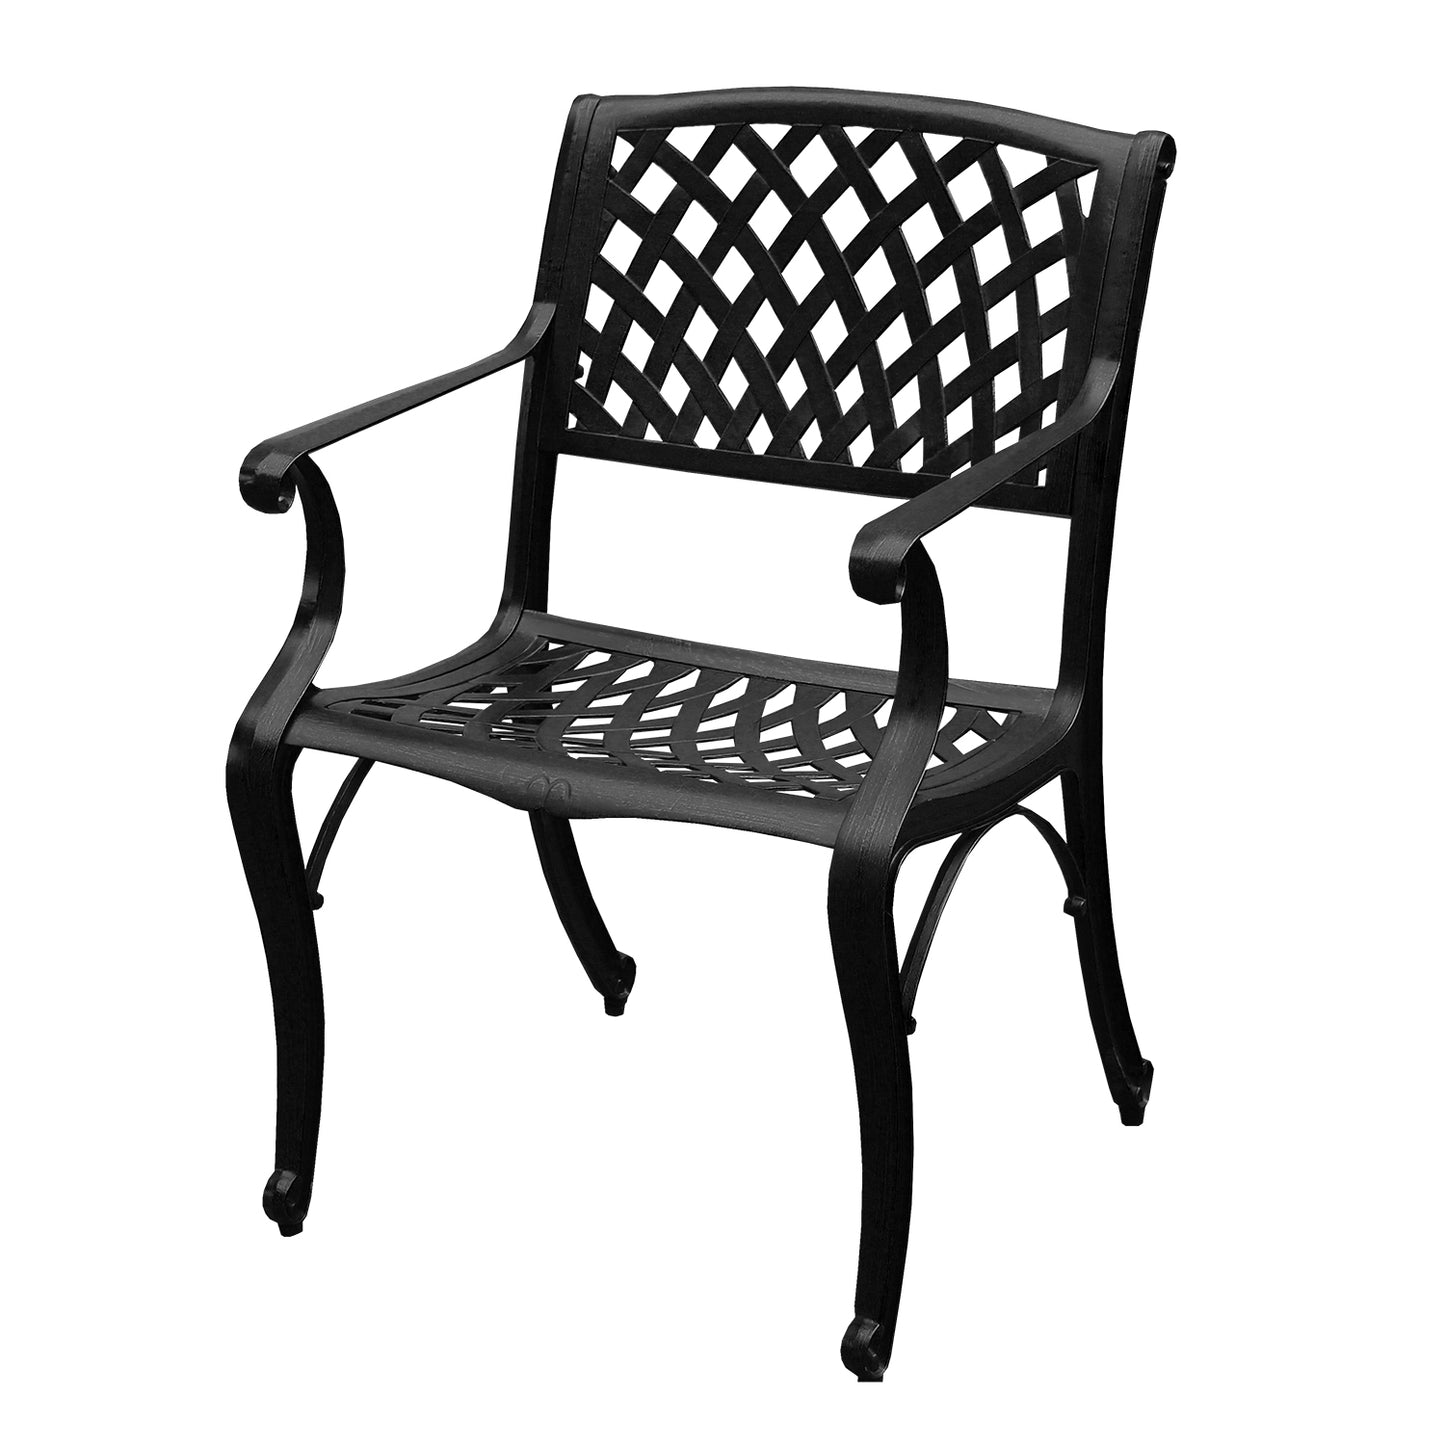 Outdoor Aluminum 5pc Square Black Patio Dining Set with Four Chairs